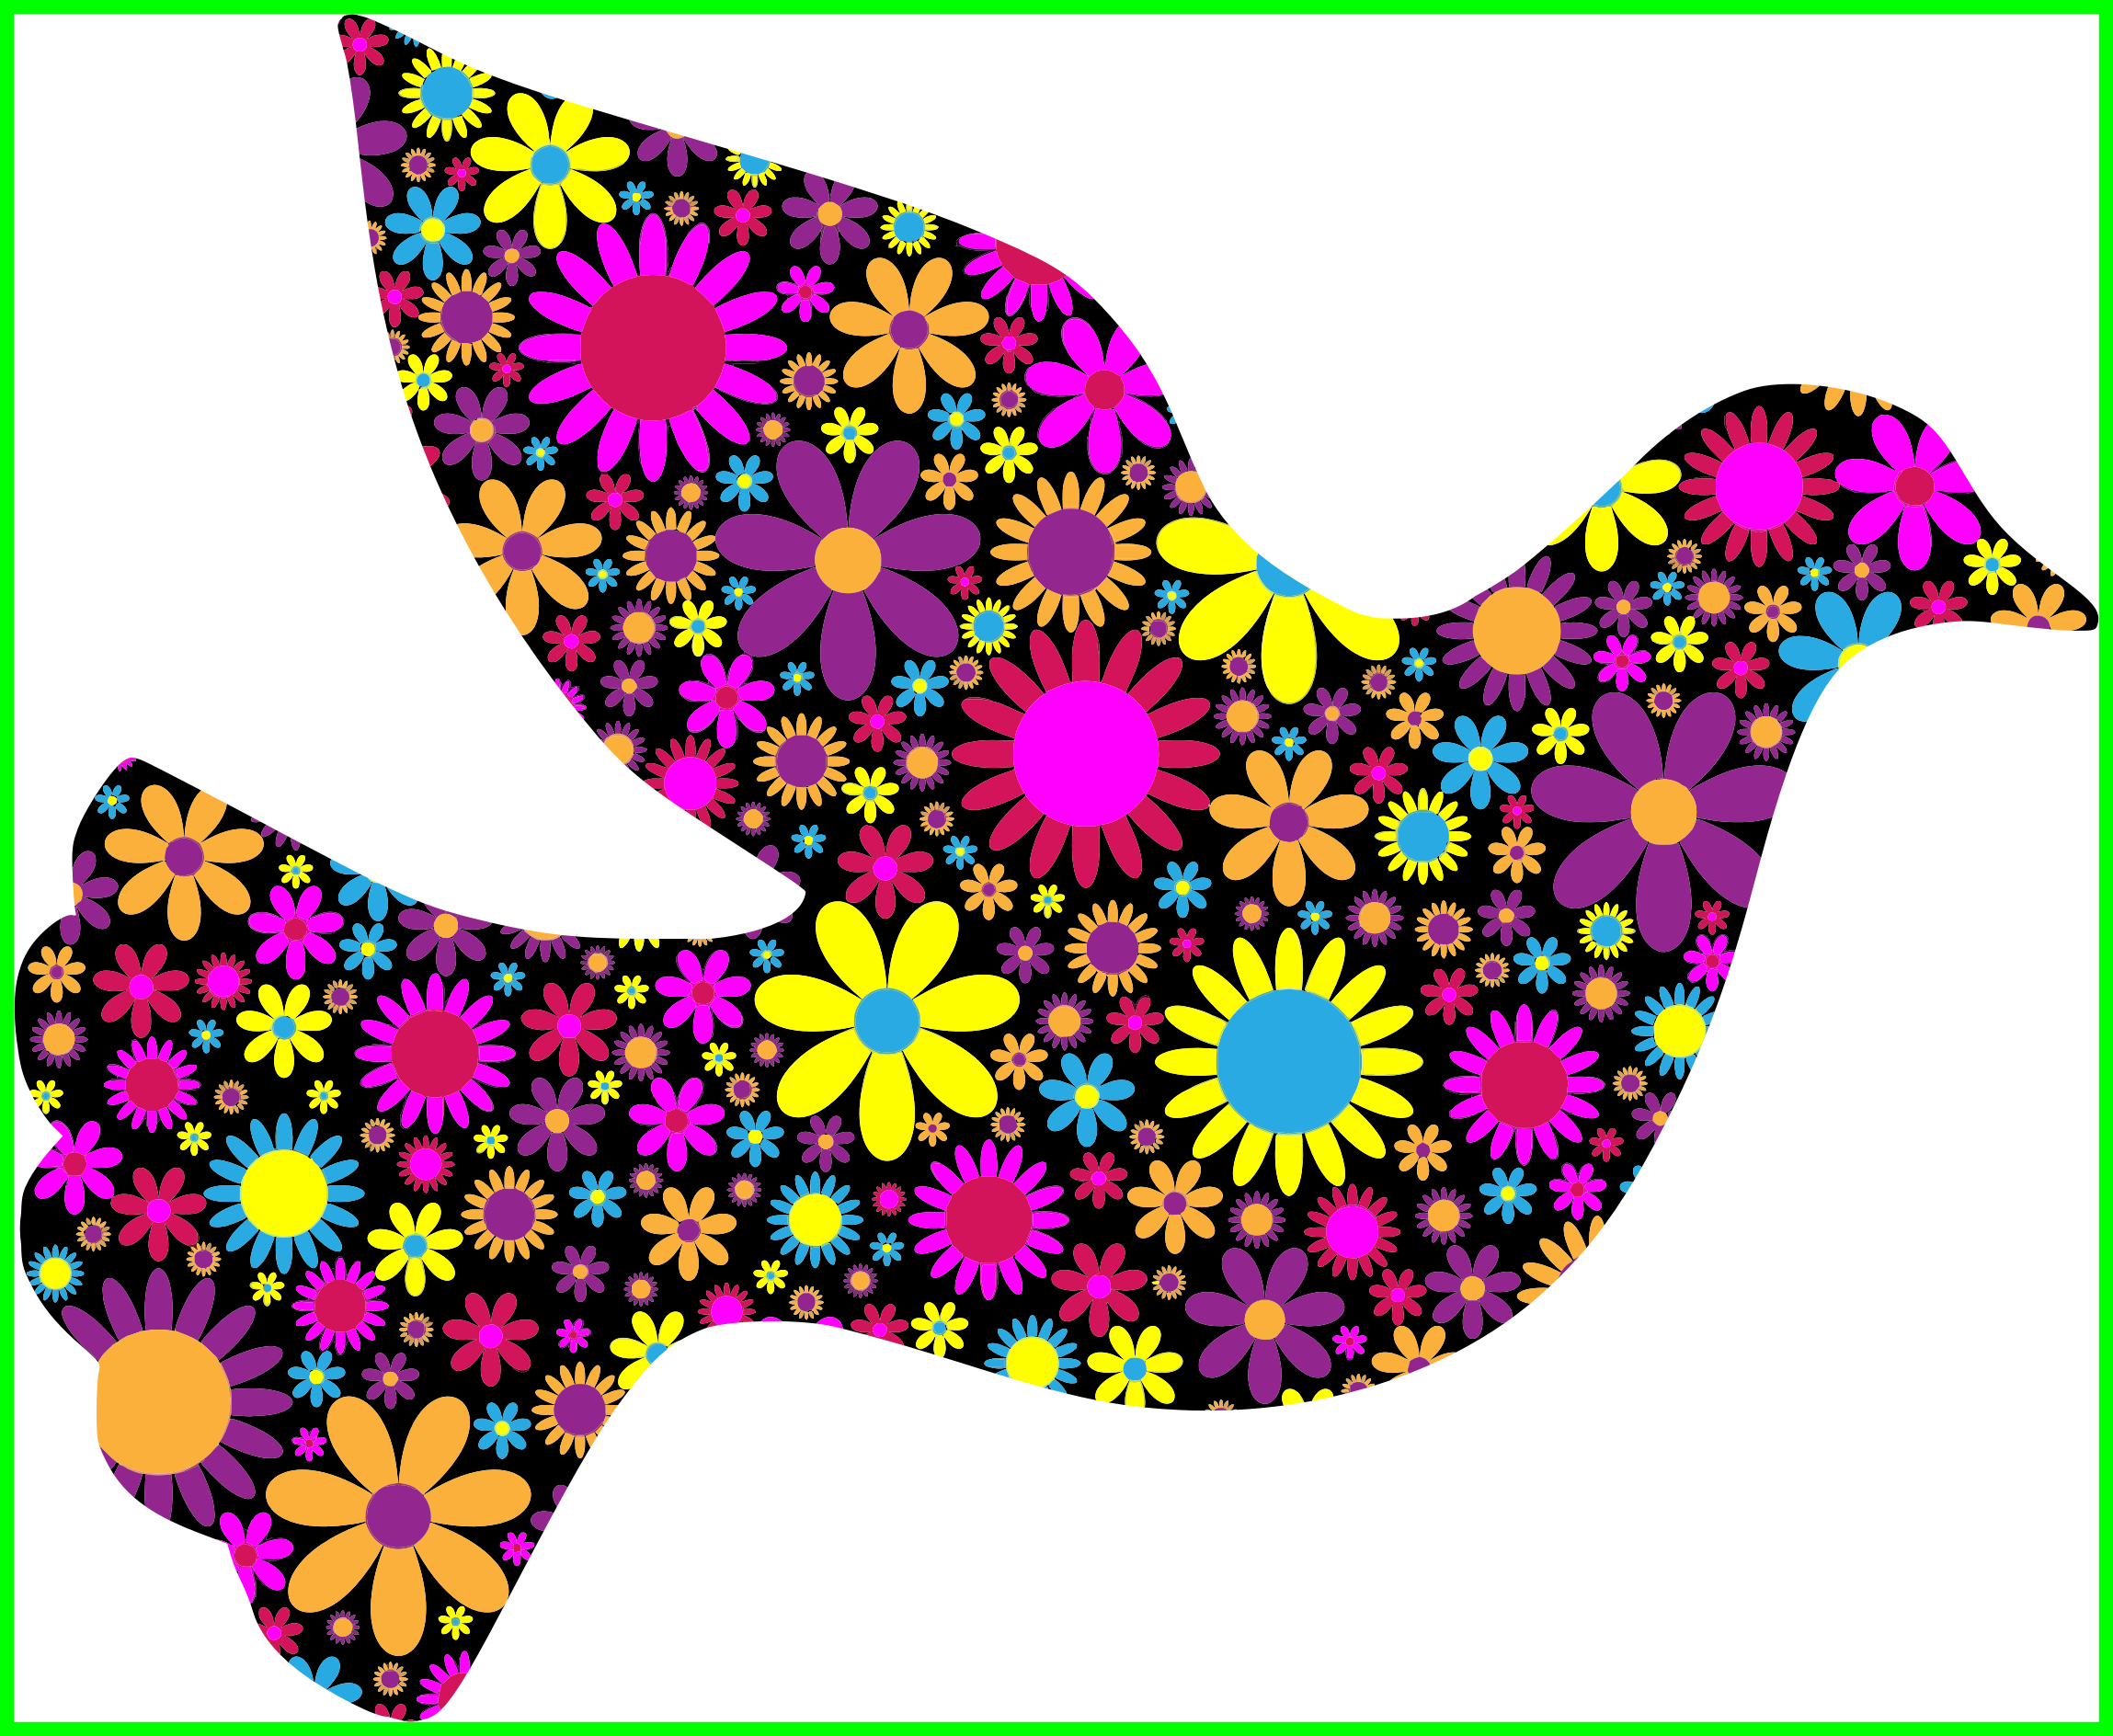 Awesome Holy With Cross Dove Fish Christian - Dove Peace Floral (2298x1888)